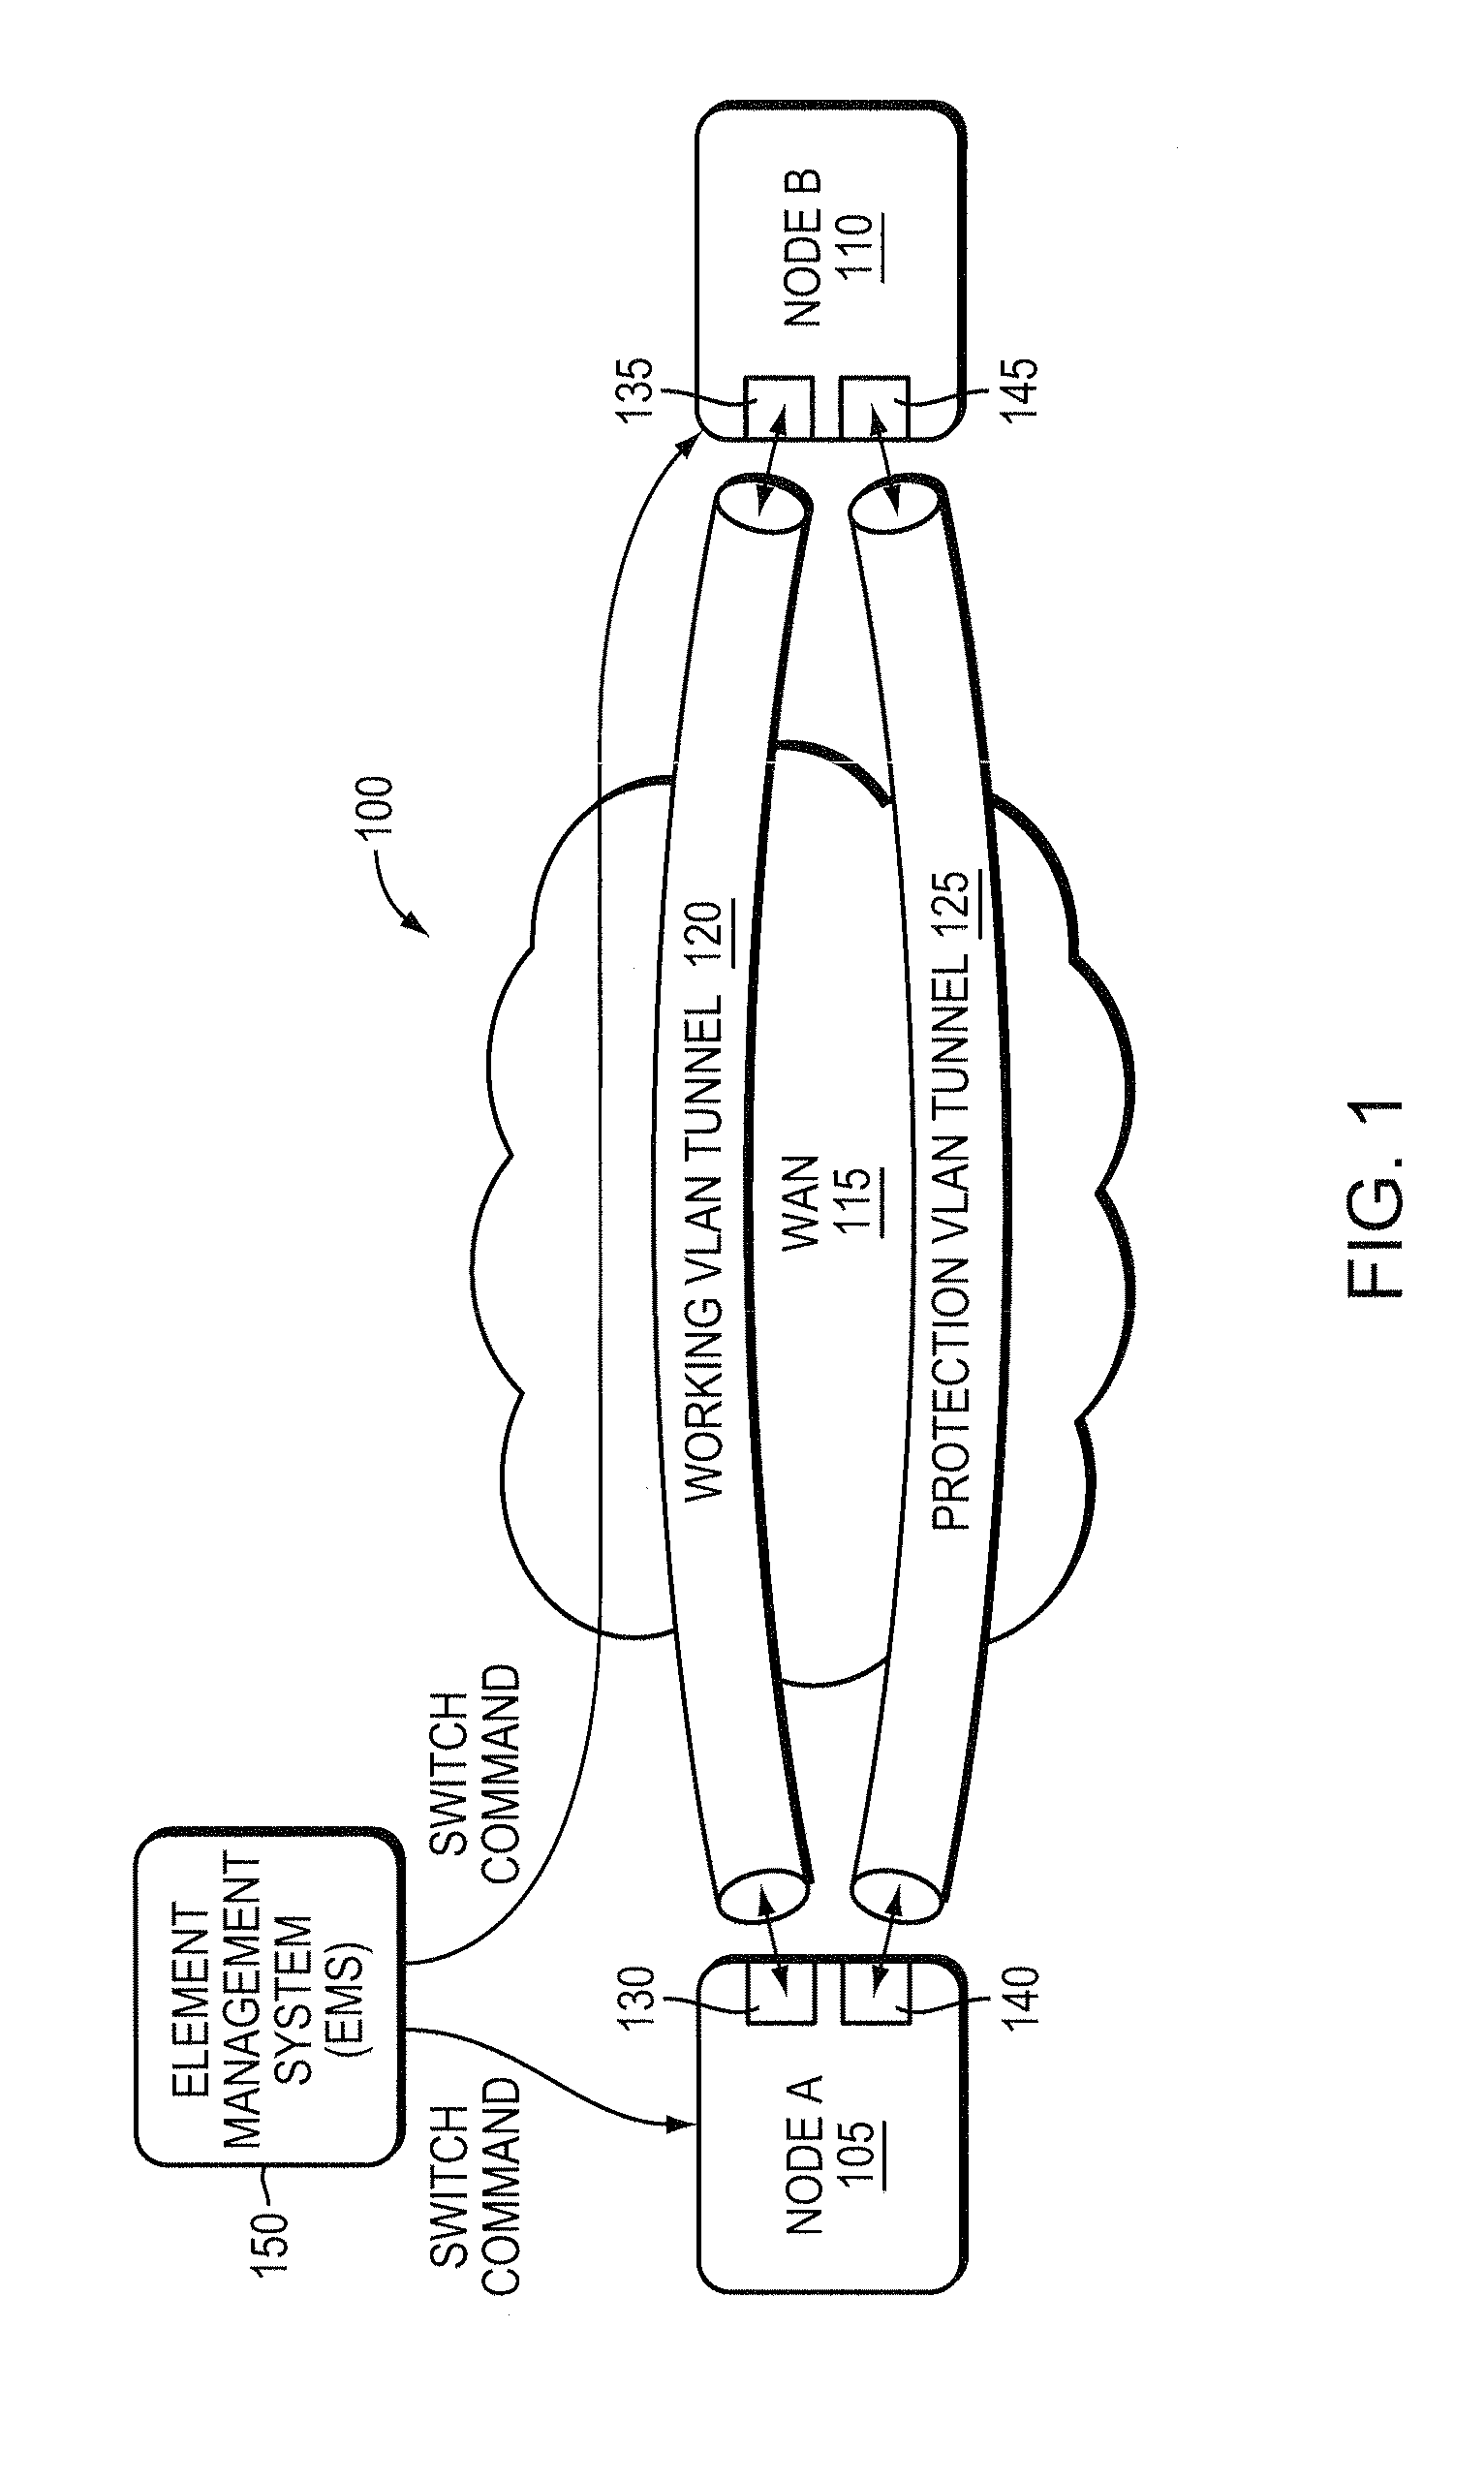 Methods and apparatuses for performing switching and for exchanging management-requested switching messages between nodes for 1:1 bidirectional virtual local area network (VLAN) protection without using y.1731-based automatic protection switching (APS) messages